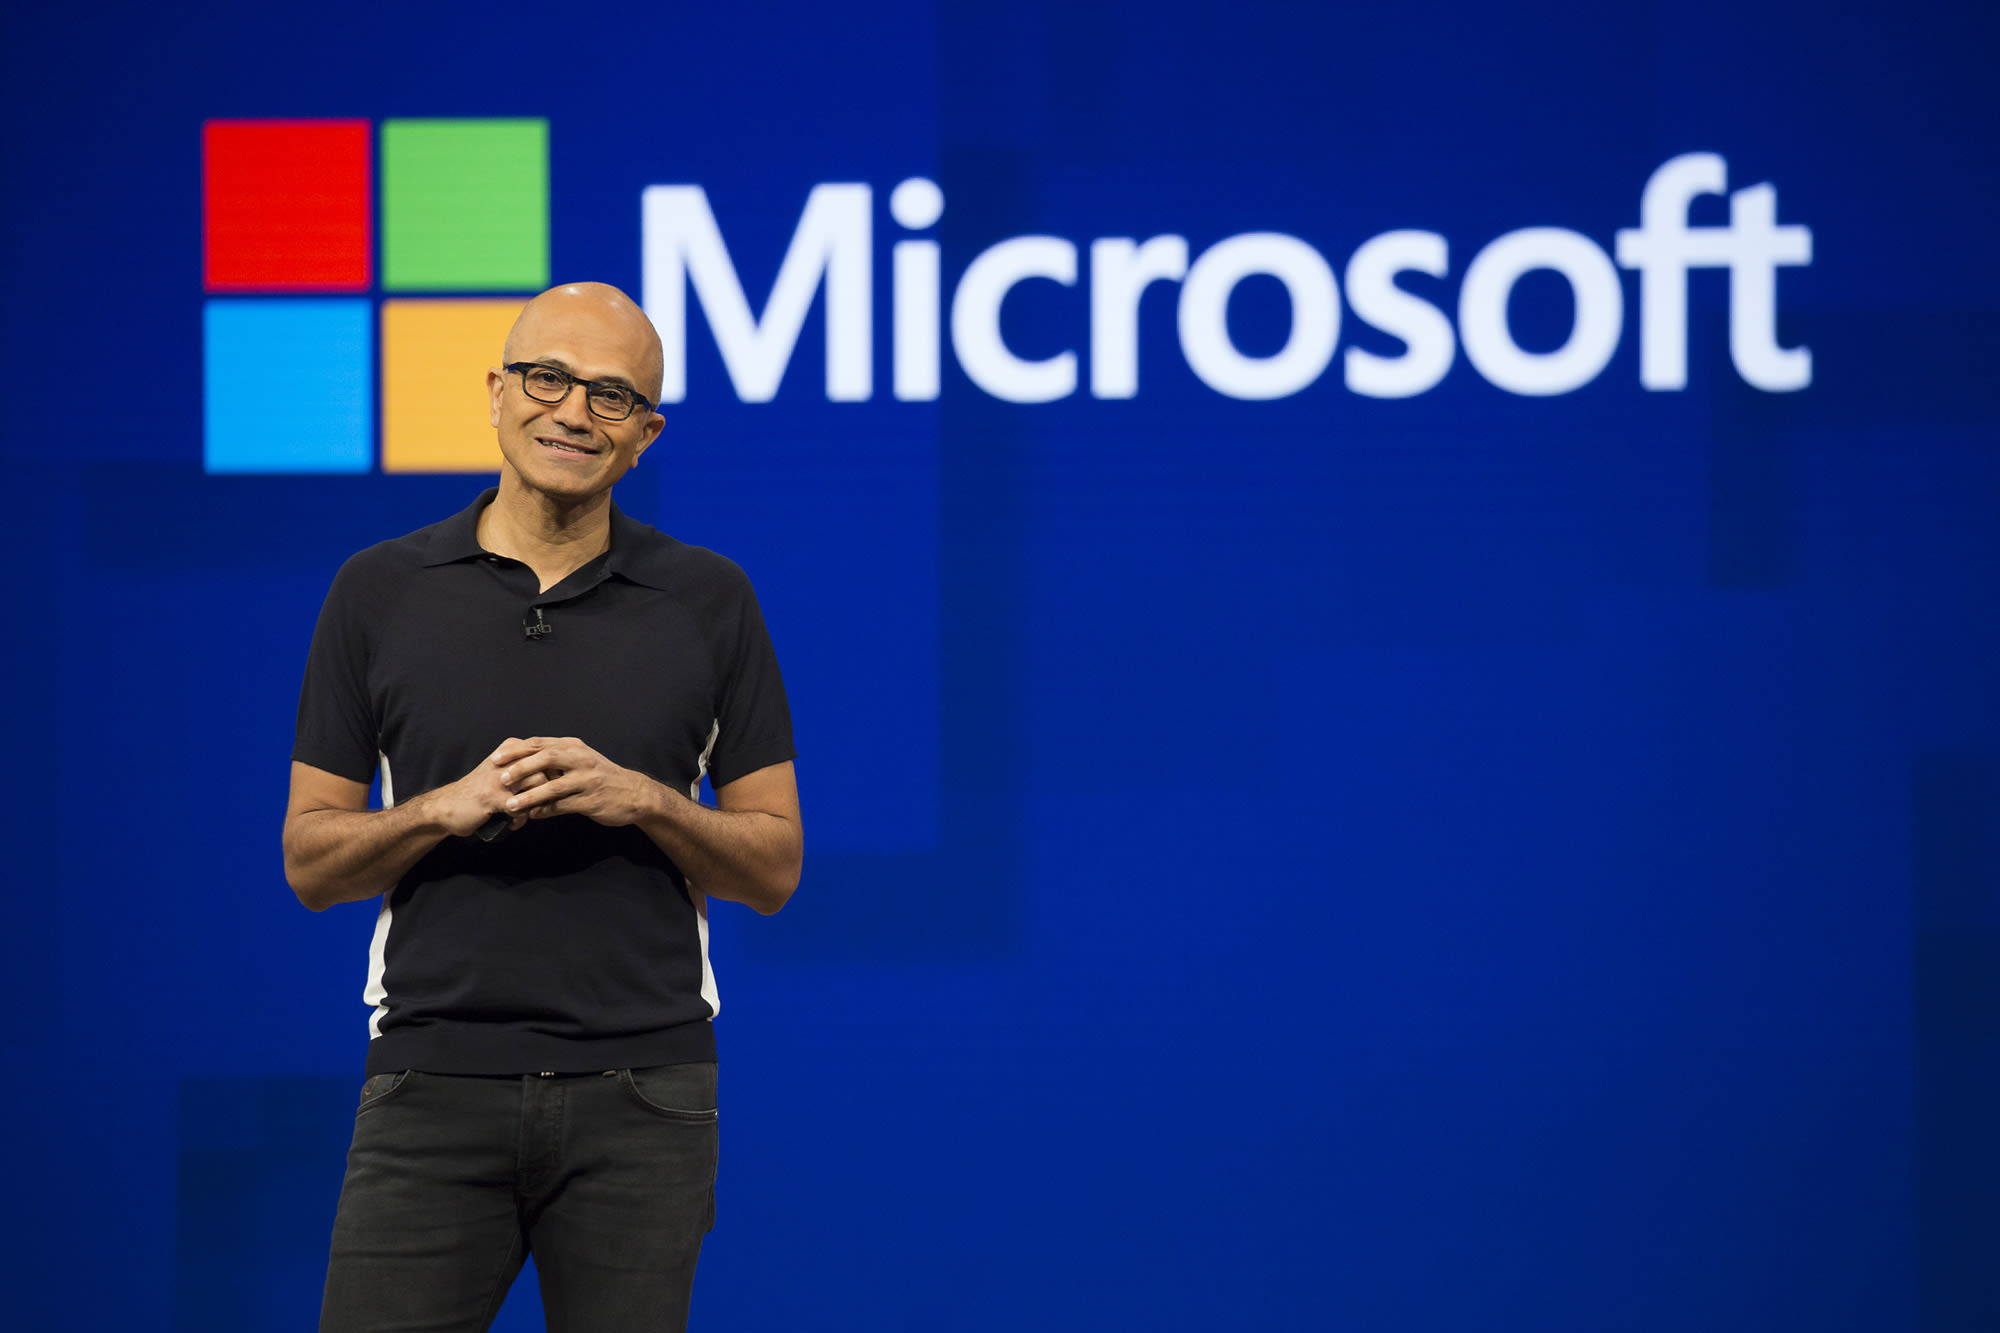 Microsoft CEO Satya Nadella: “We Are Waiting For Competition To Arrive” In AI LLM Race